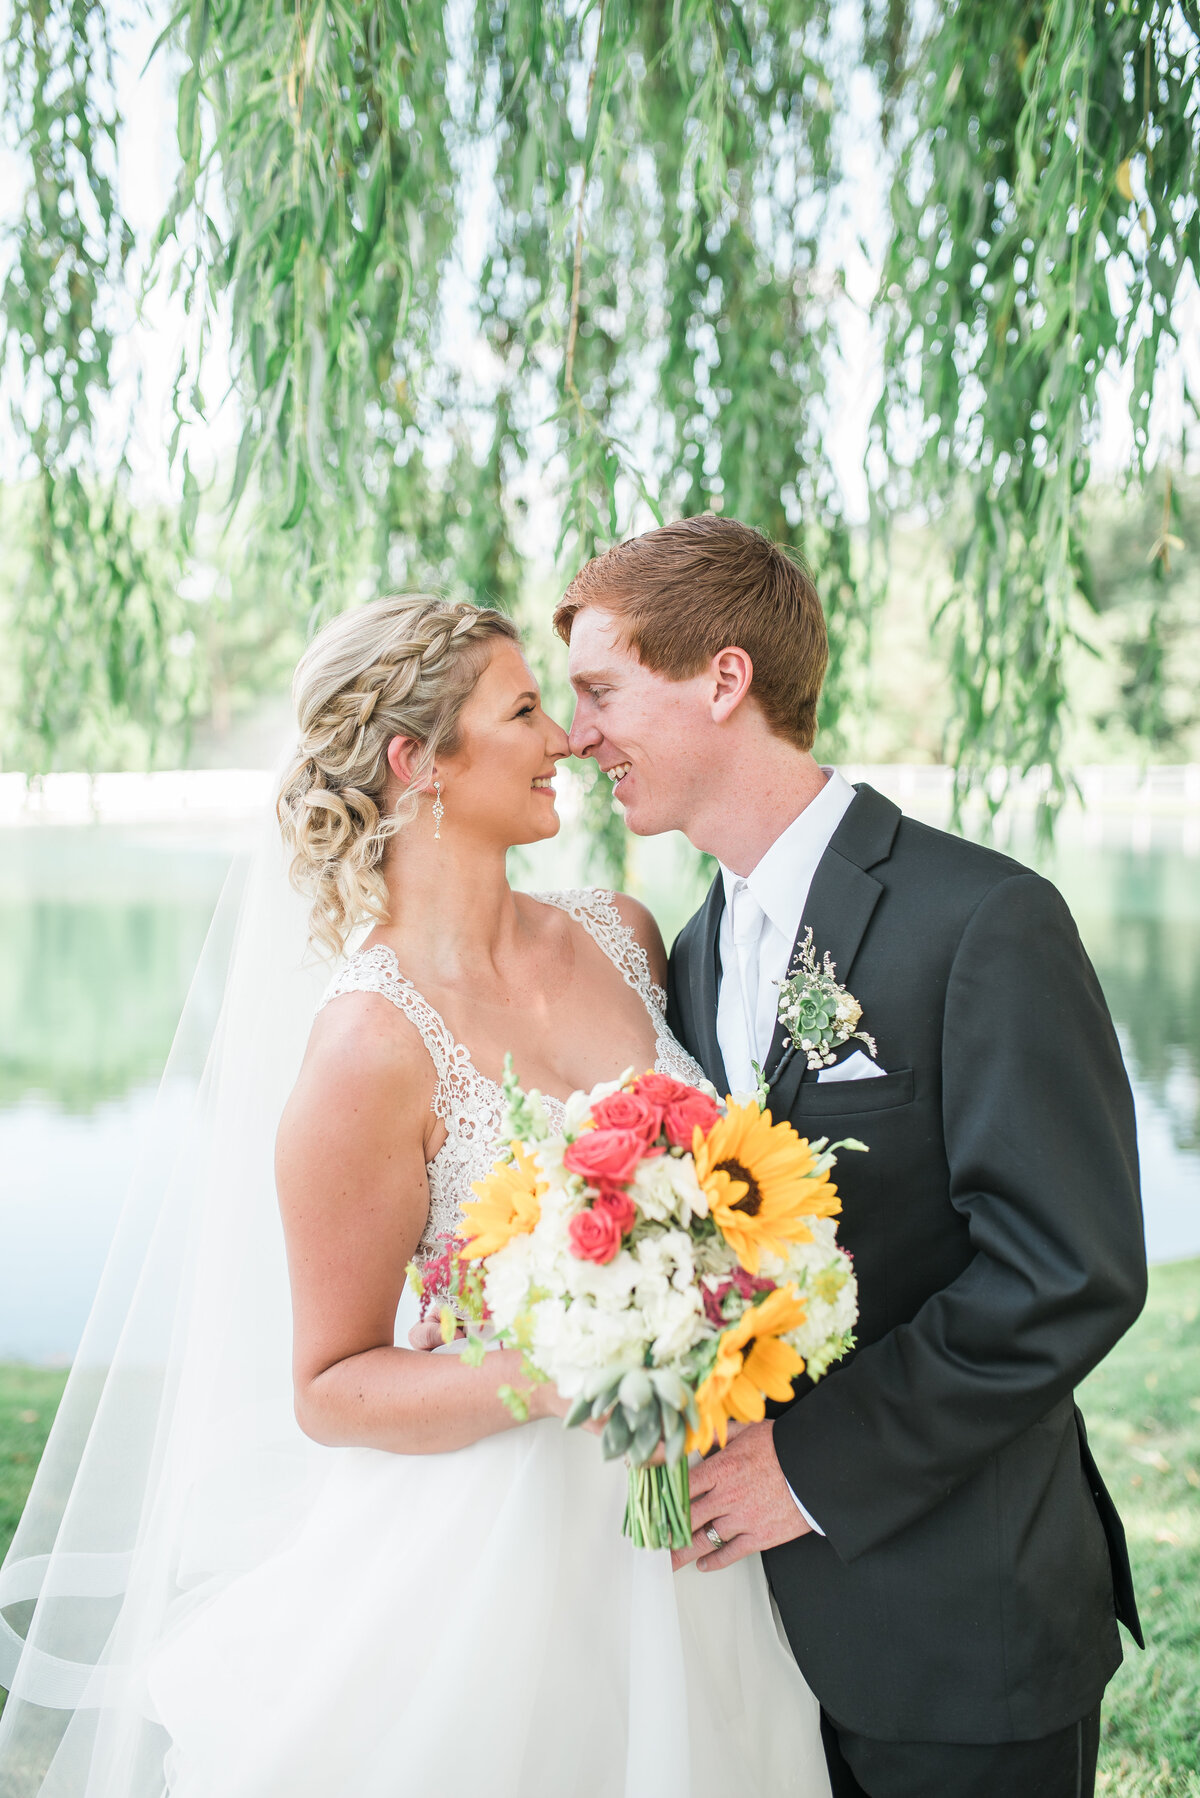 bride and groom wedding portrait at pond view farm maryland wedding venue maryland wedding photographer